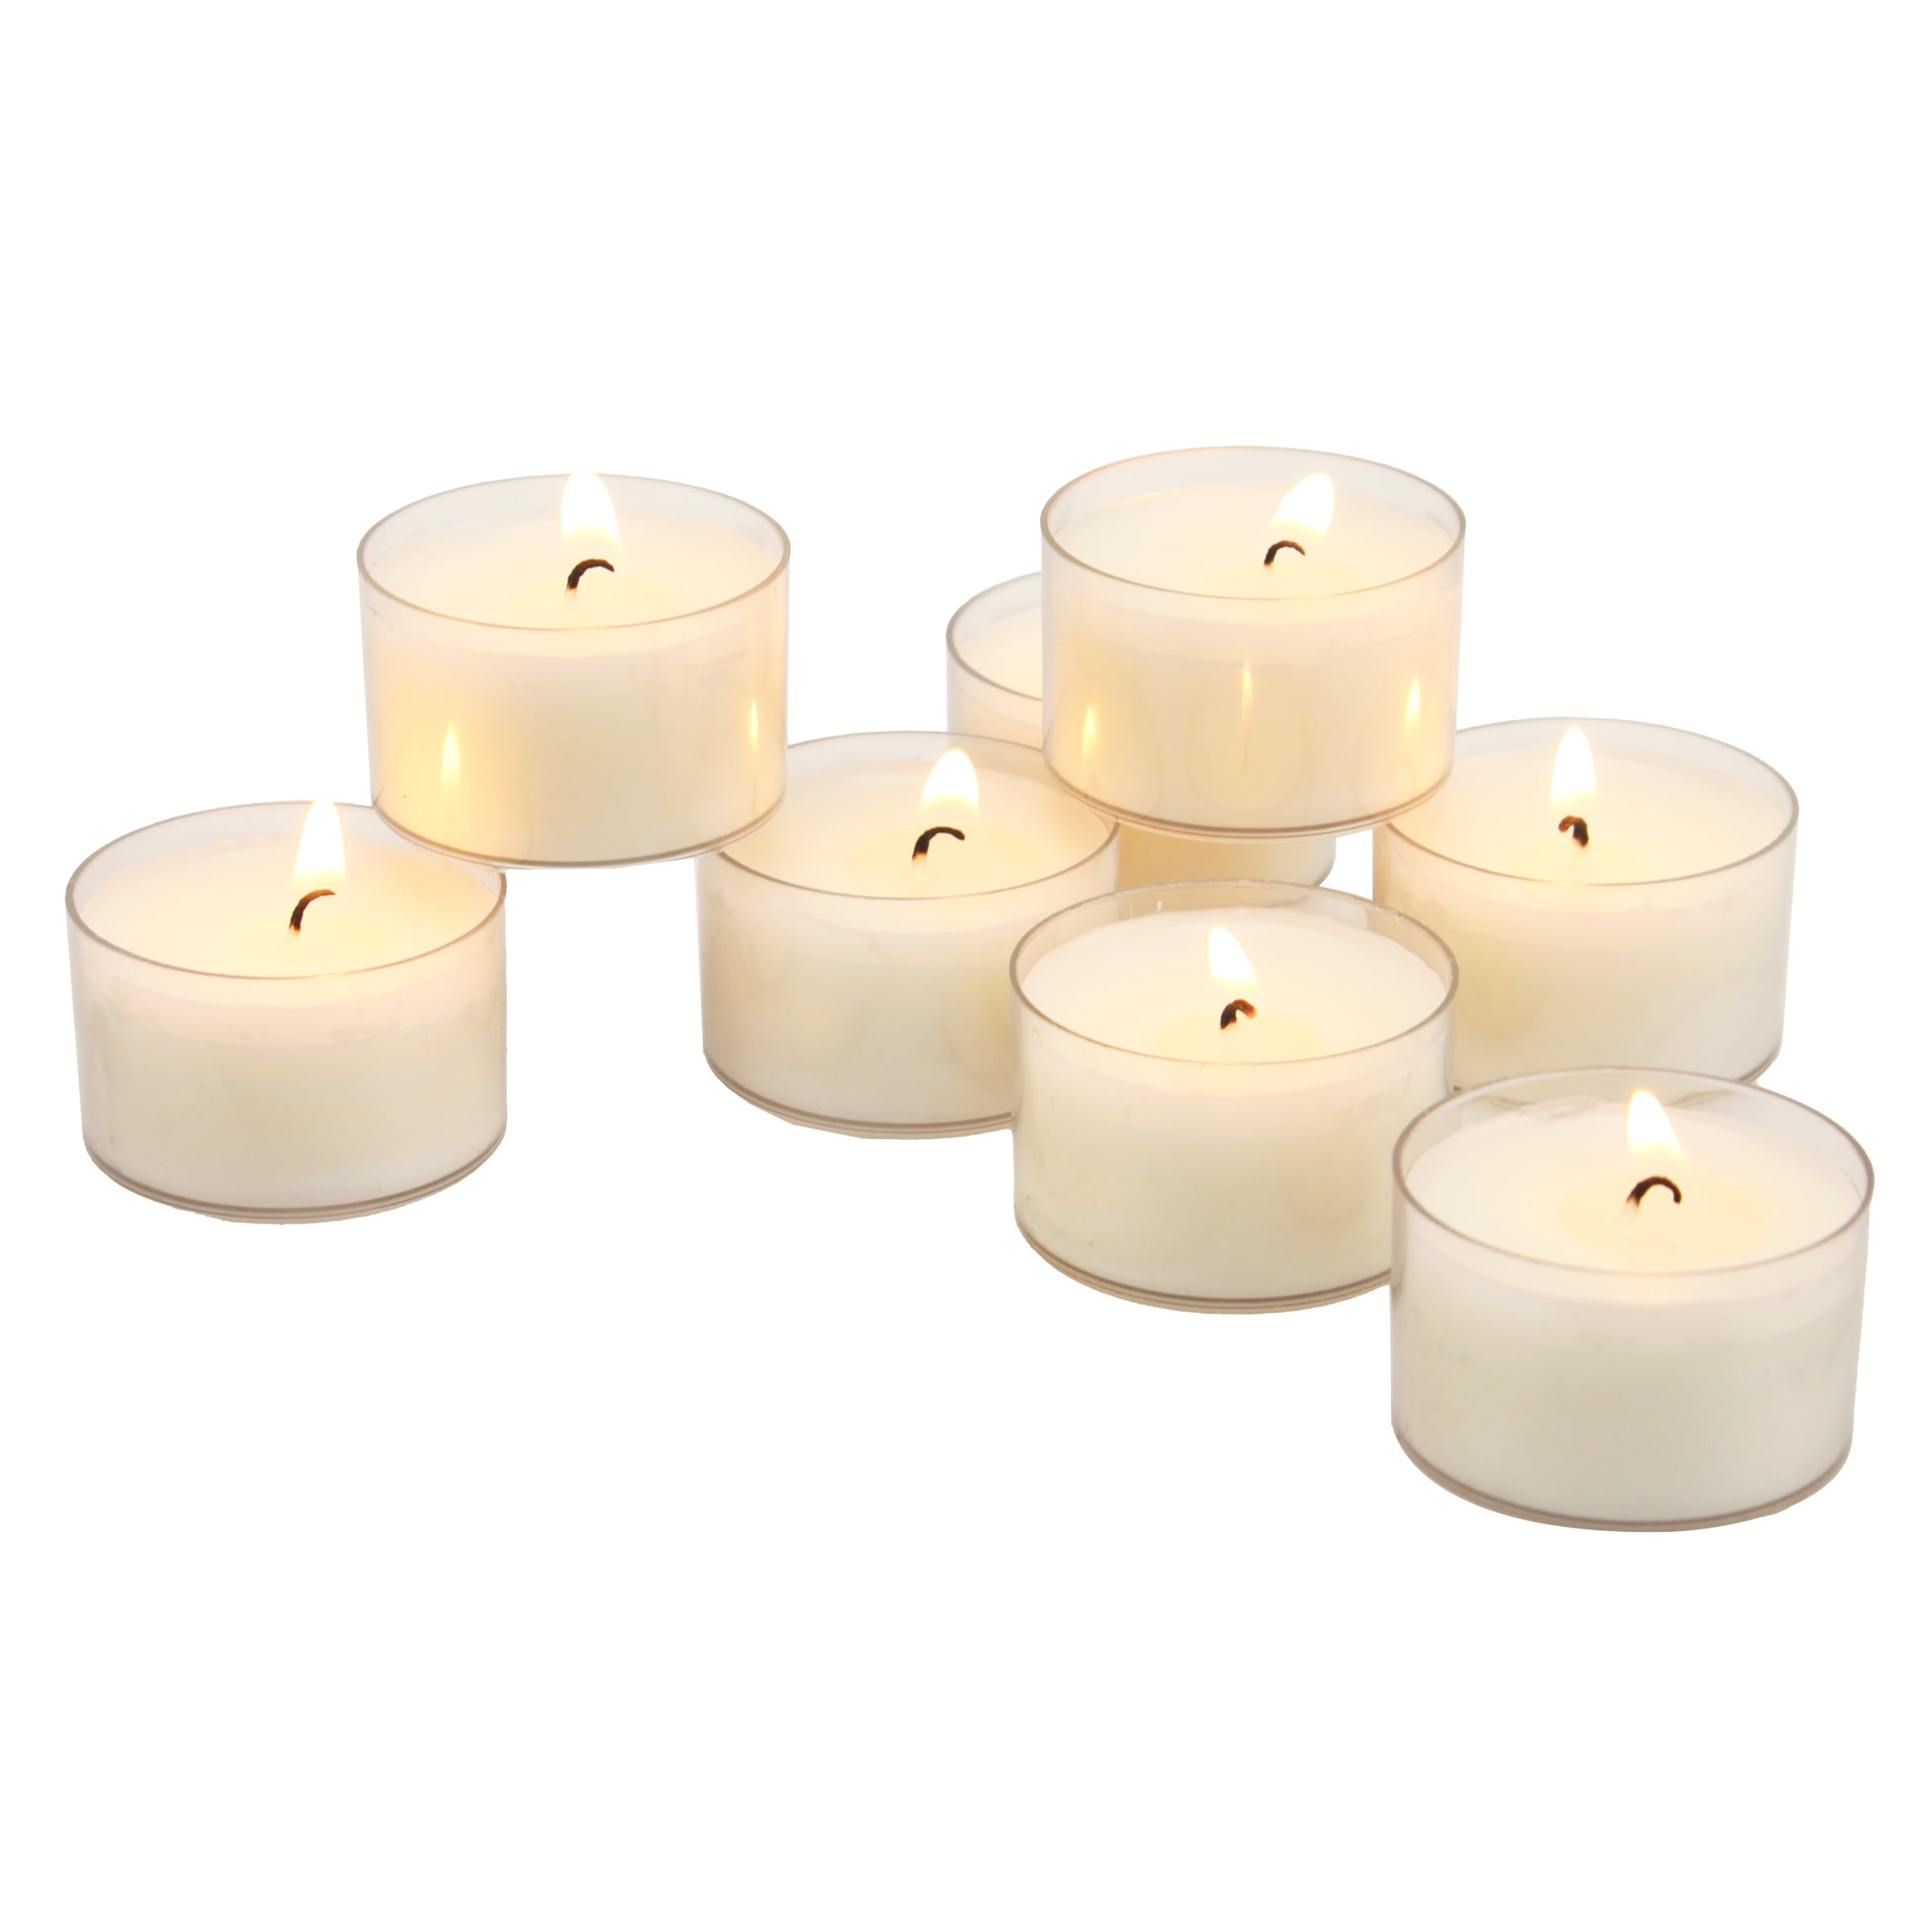 - Made with Essential /& Natural Oils Pure Gardenia Tealight Candles Bulk Pack 24 White Highly Scented Tea Lights Clear Cup for Beautiful Candlelight Flower /& Floral Collection